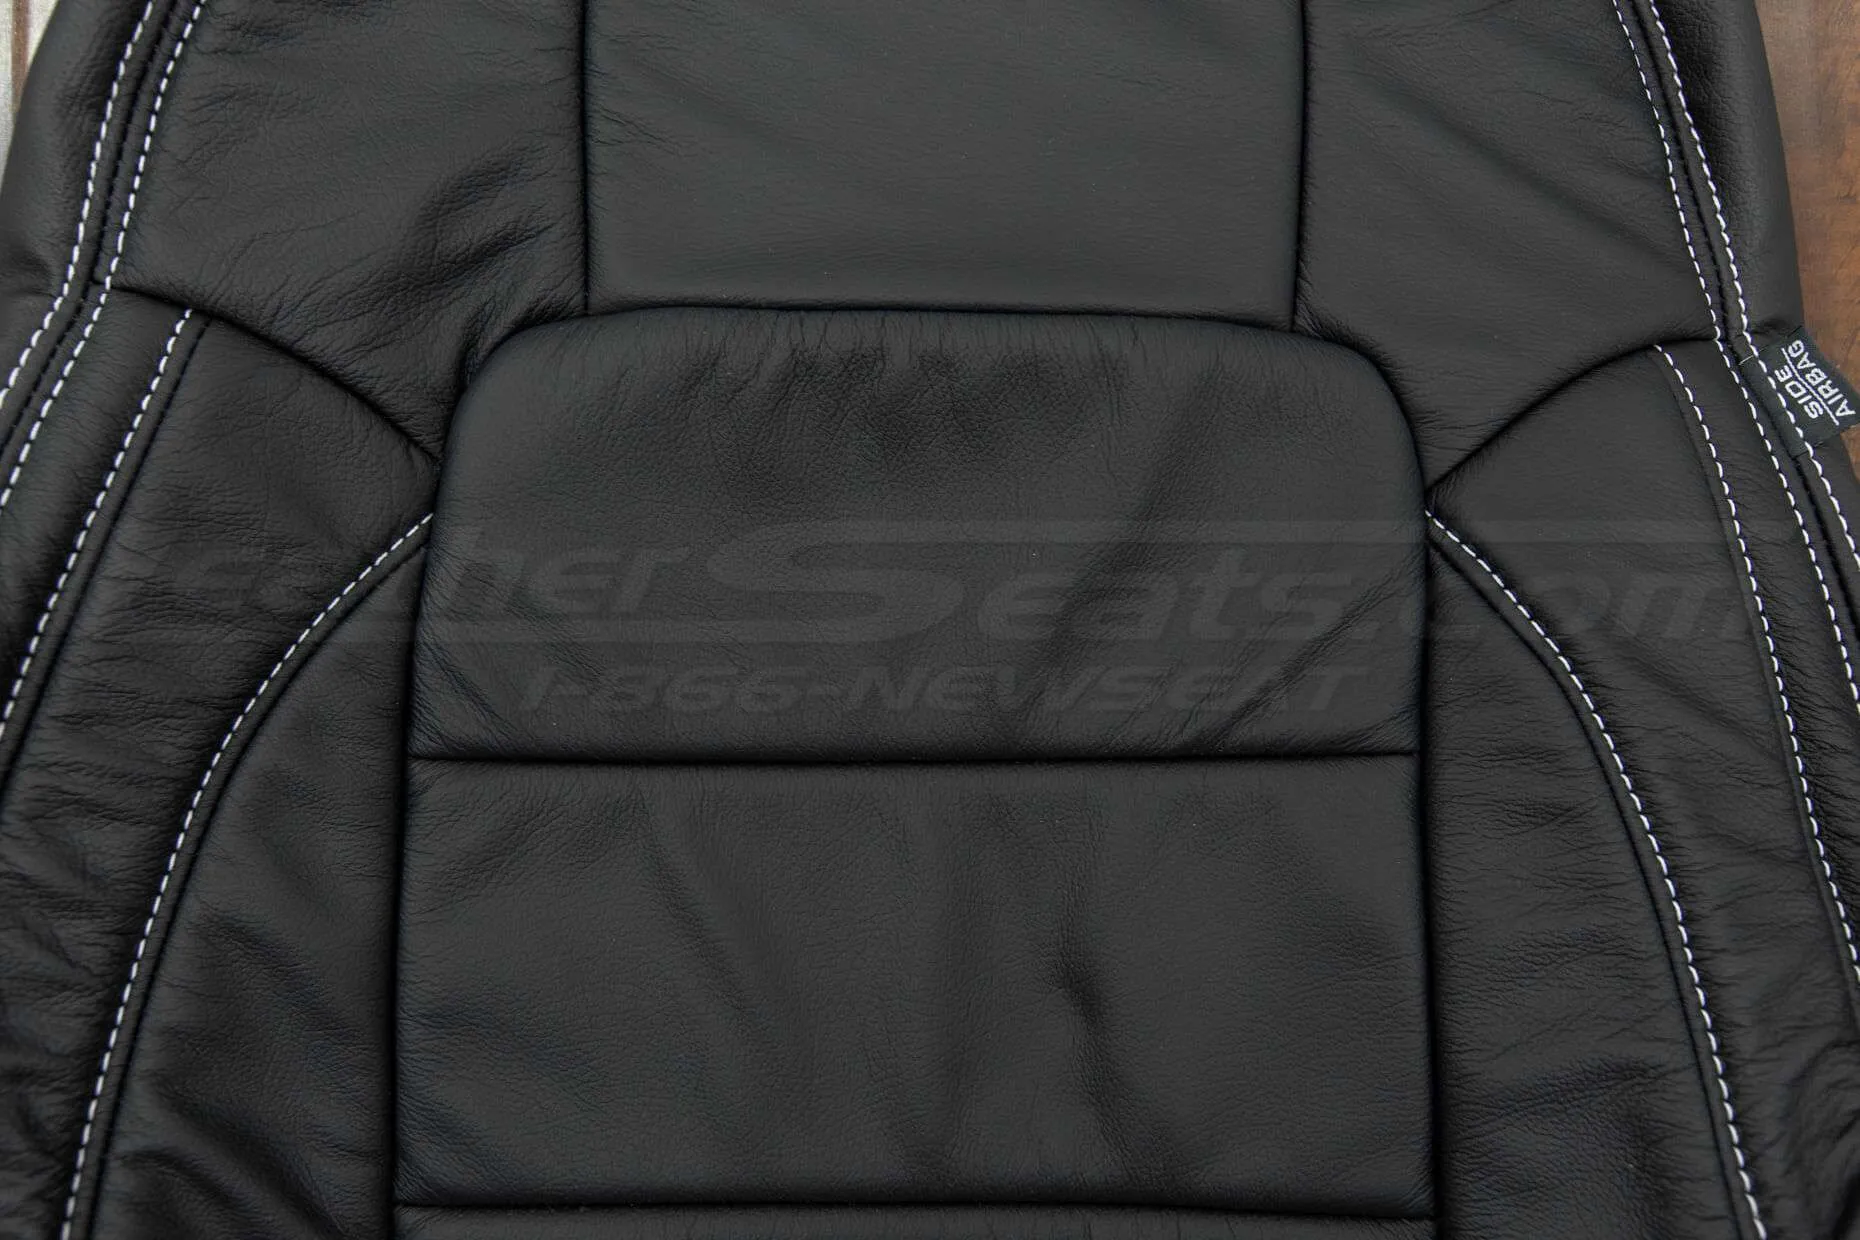 Ford Mustang Leather Seats - Black - Backrest insert close-up